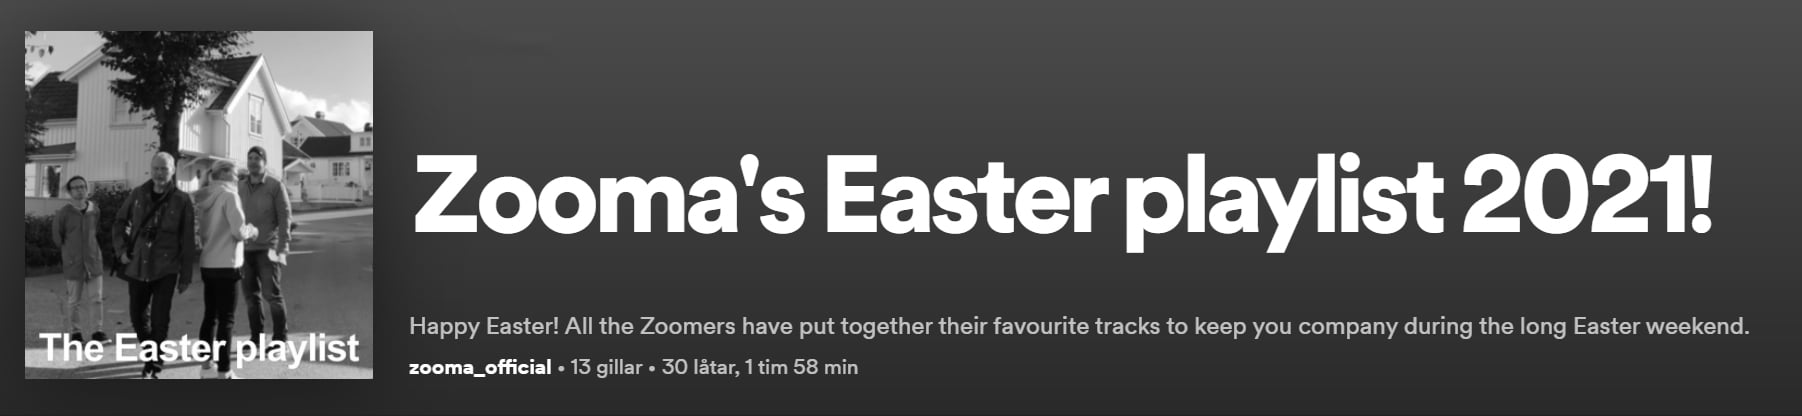 Zooma-easter-playlist